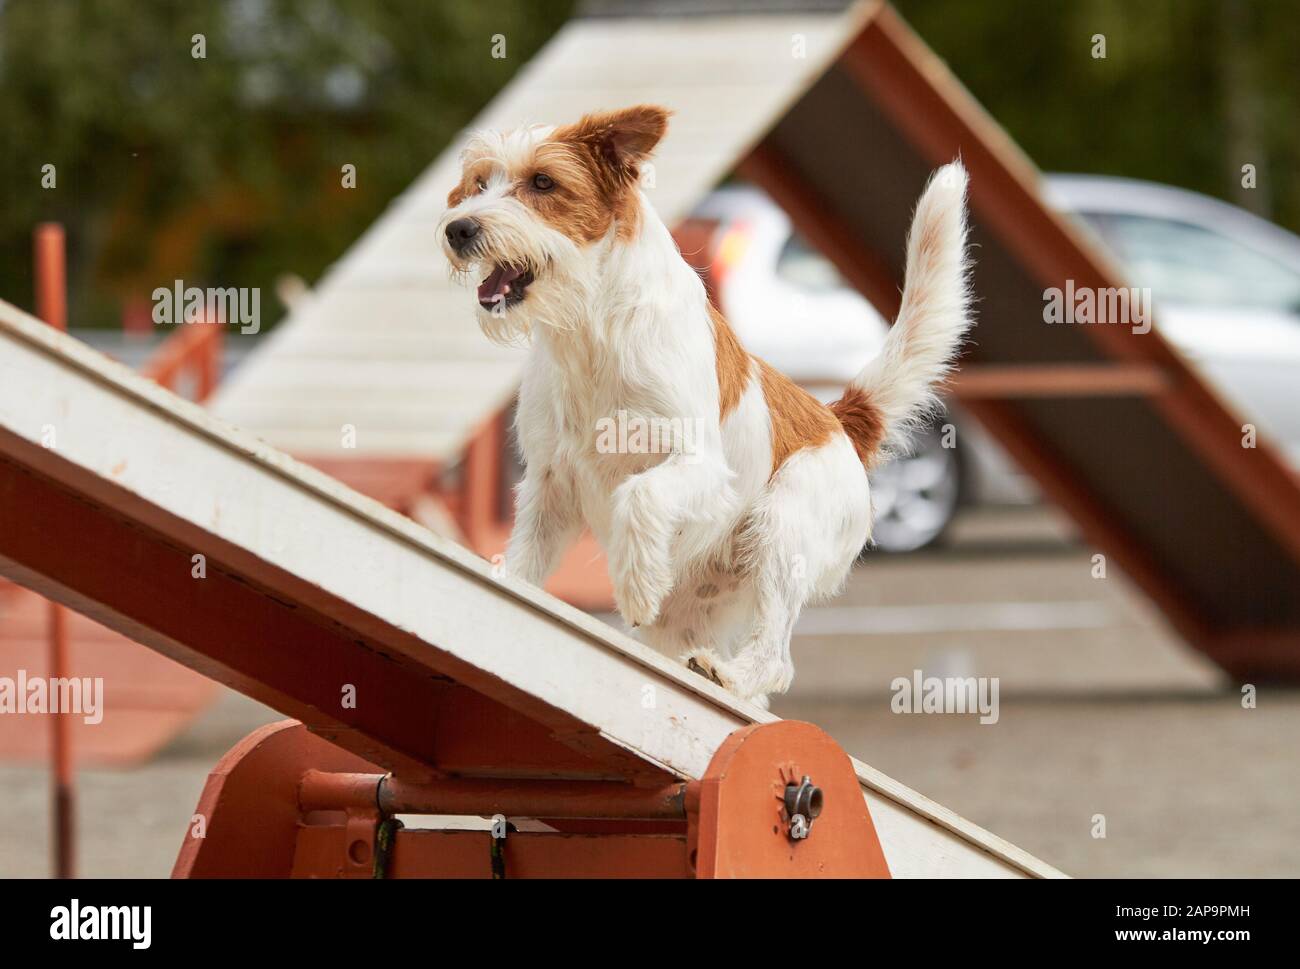 Jack Russell Terrier walking over a hurdle at dog agility training. Big fur blowing in wind. Action and sports in concept. Stock Photo